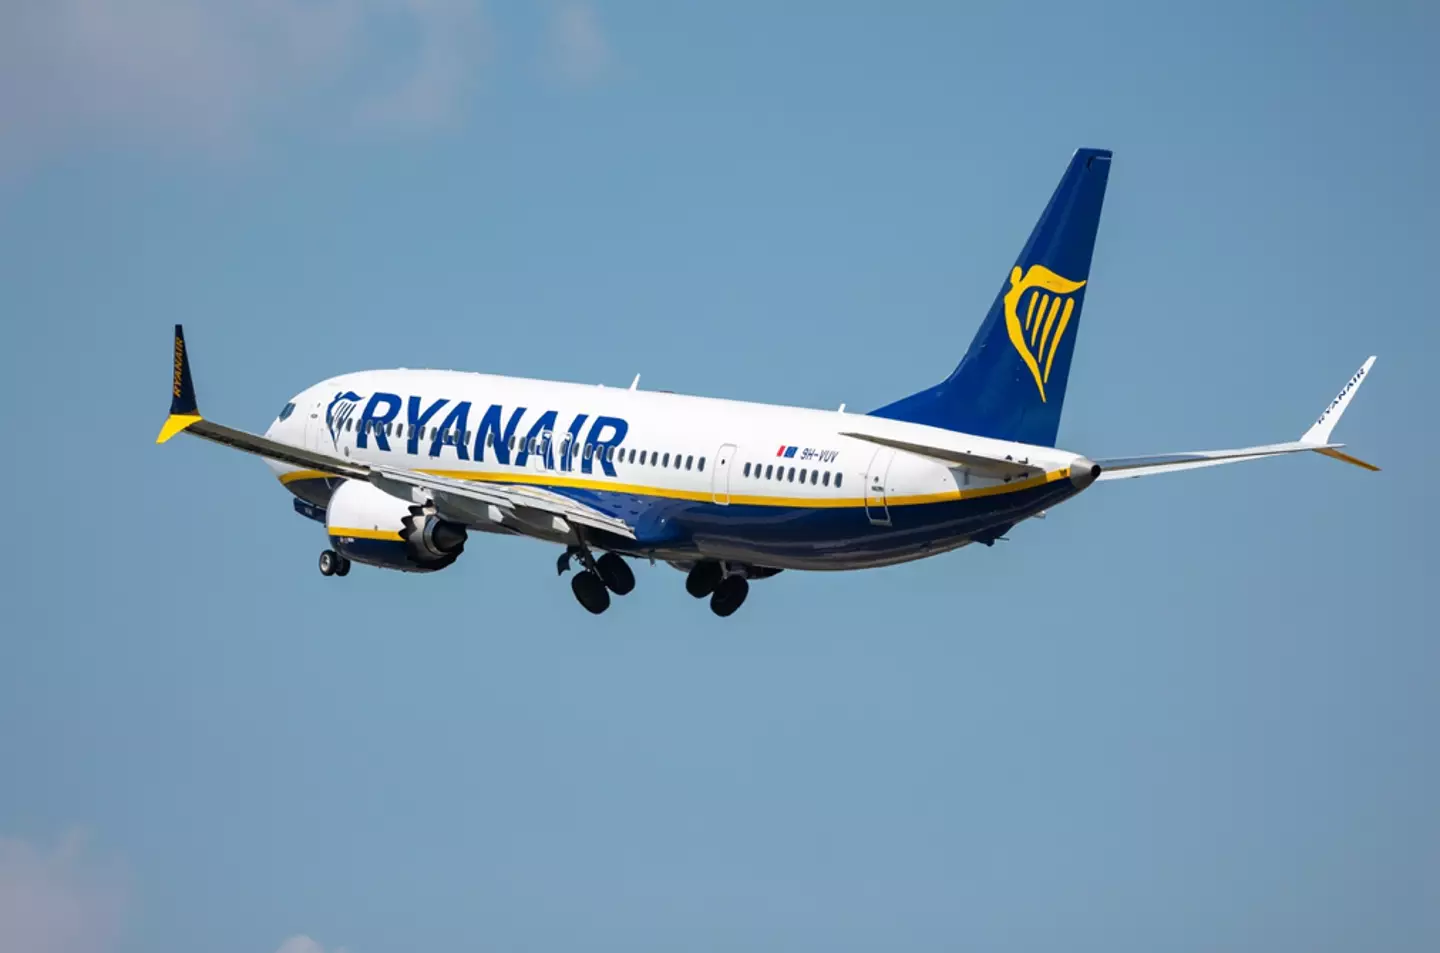 The apparent 'riot' took place on a Ryanair flight.